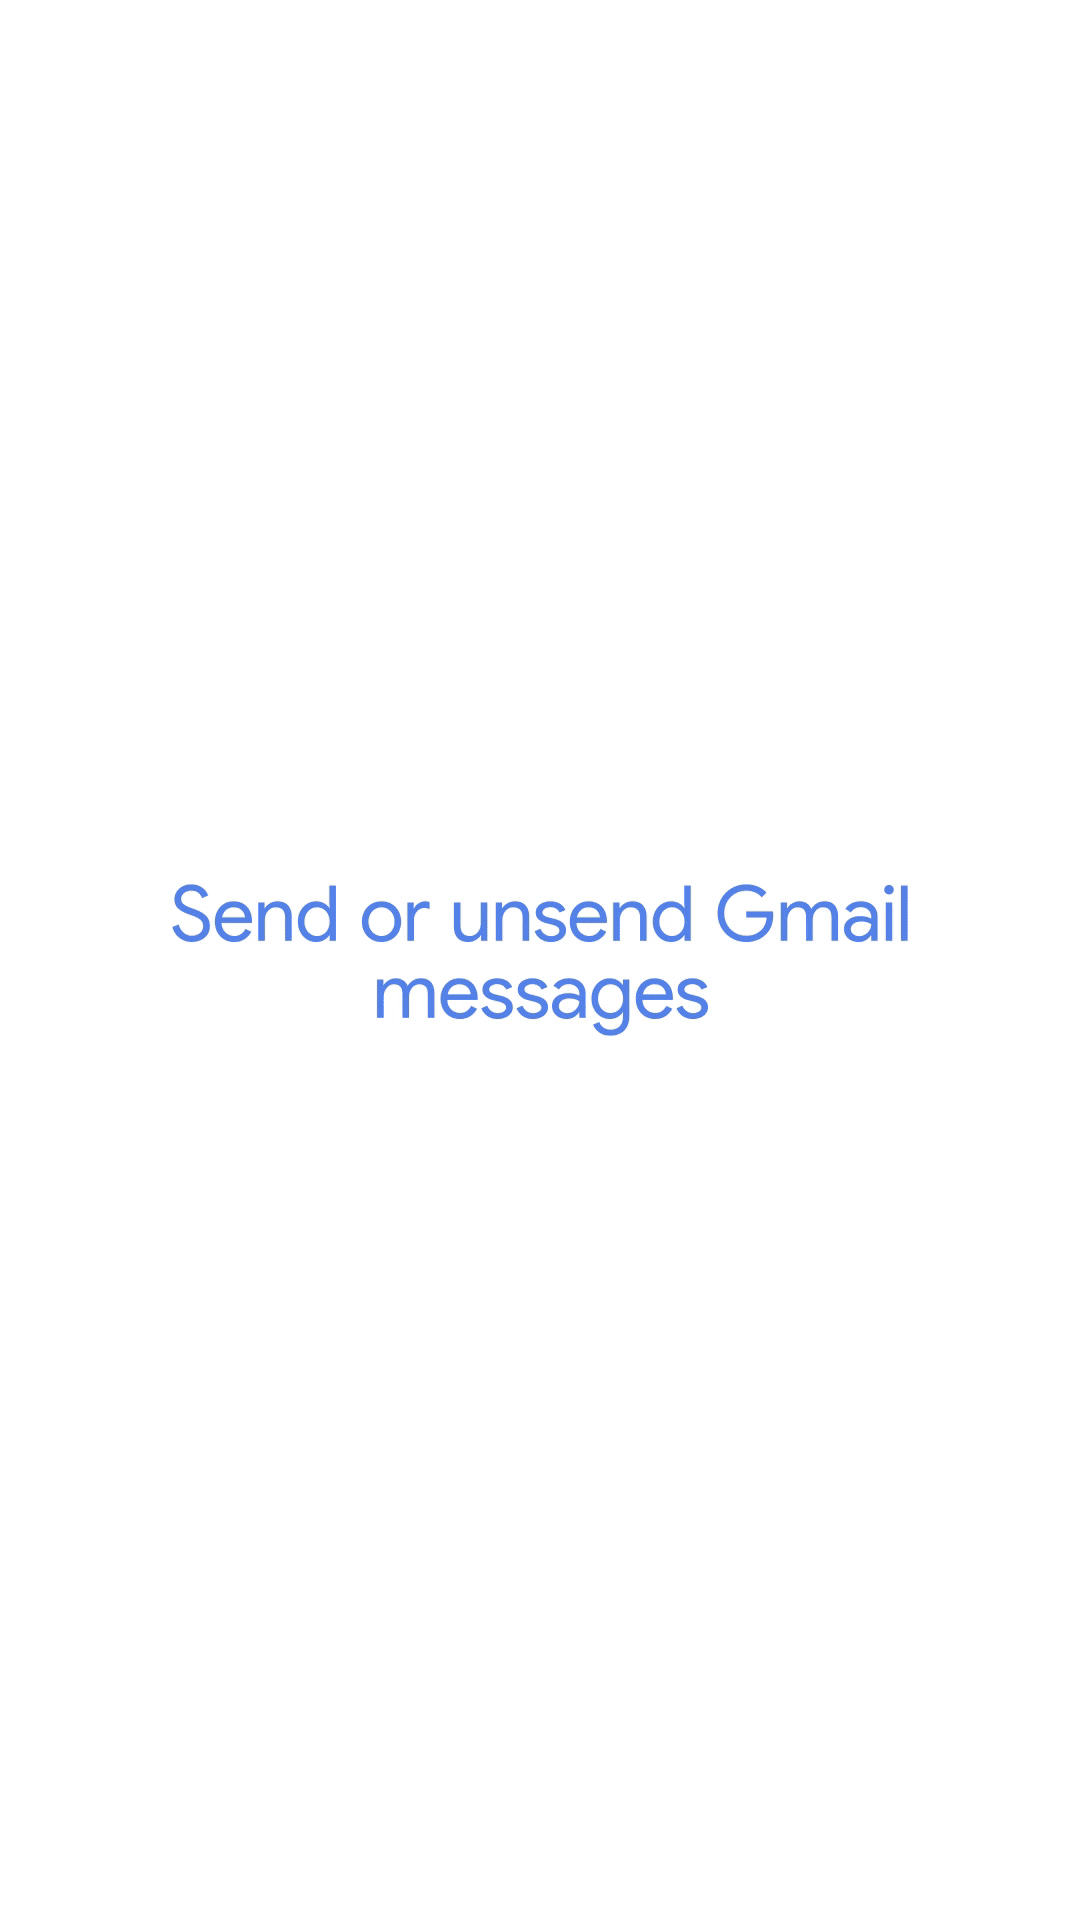 An animation showing how to send and unsend a message in Gmail on Android